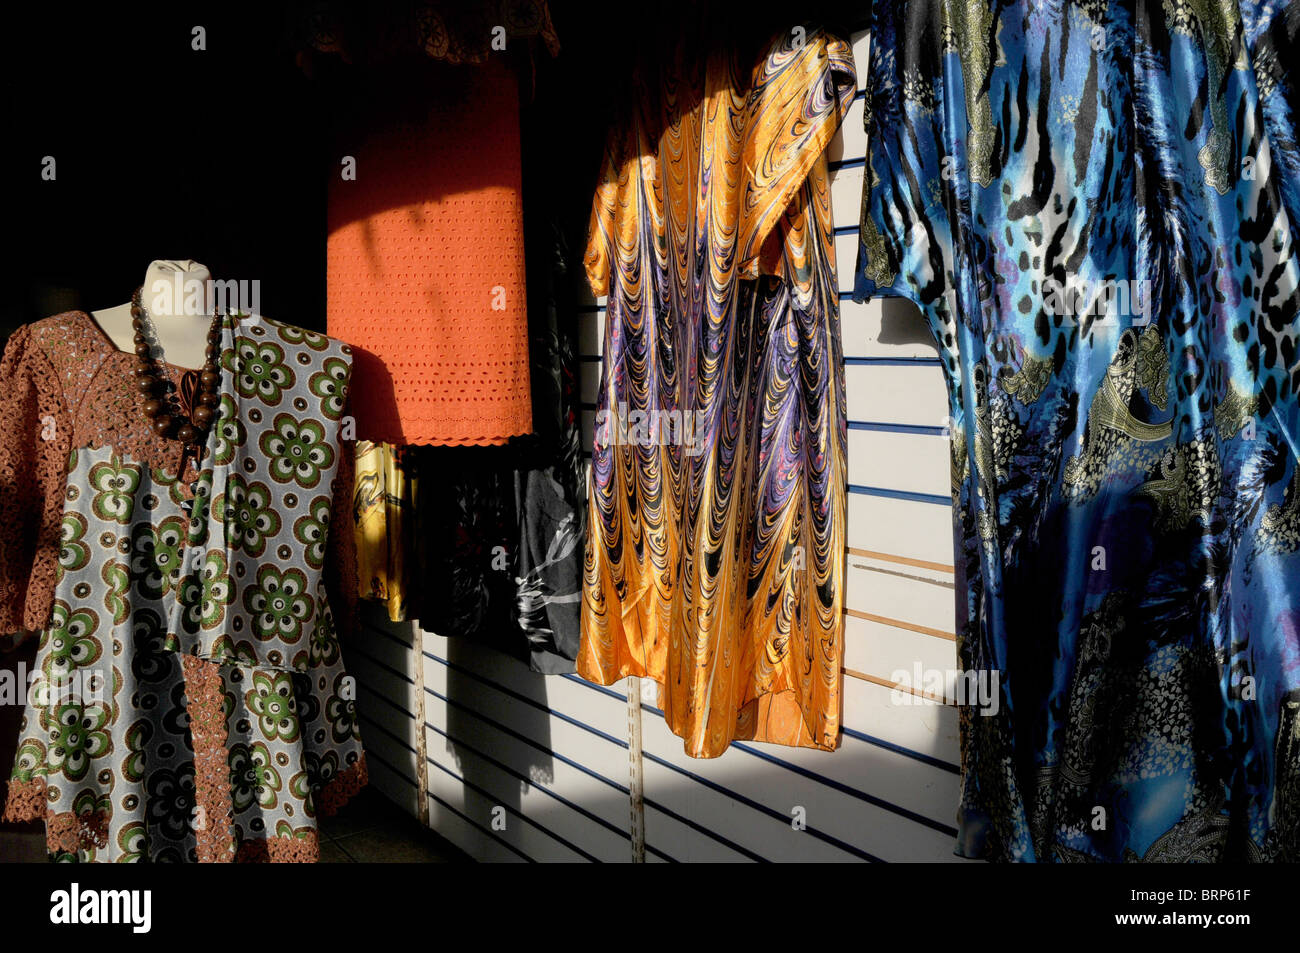 UK.Afro Caribbean textile and cloth shop in Ridley Rd. market,Hackney London Stock Photo